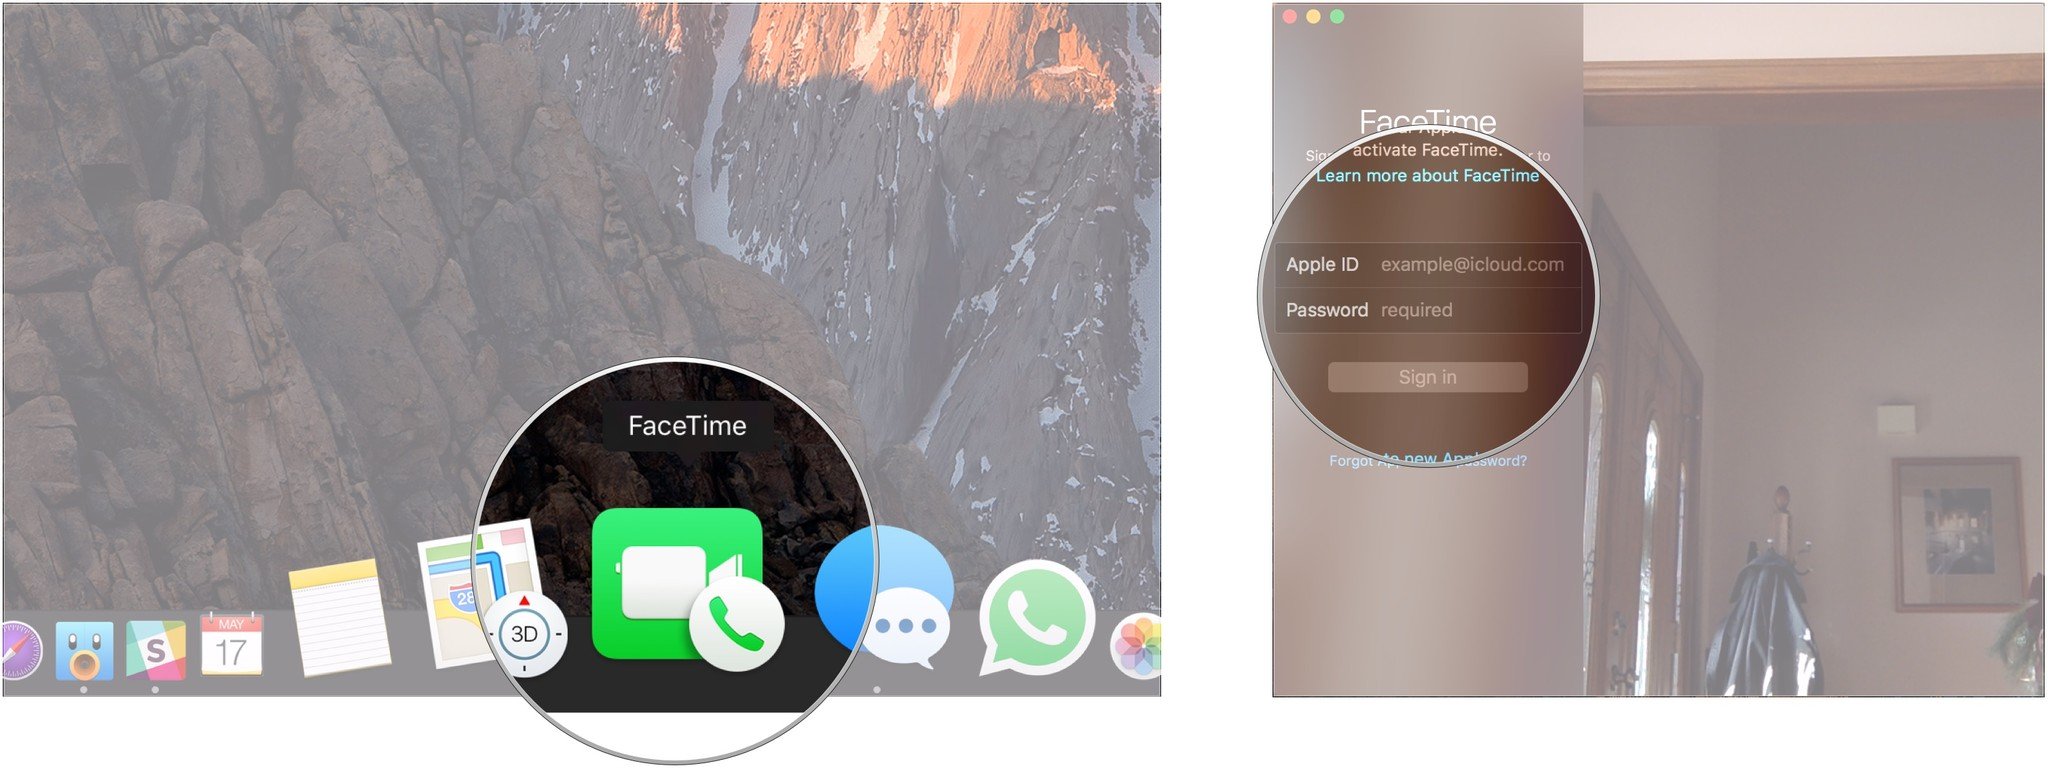 how to use facetime on mac pro